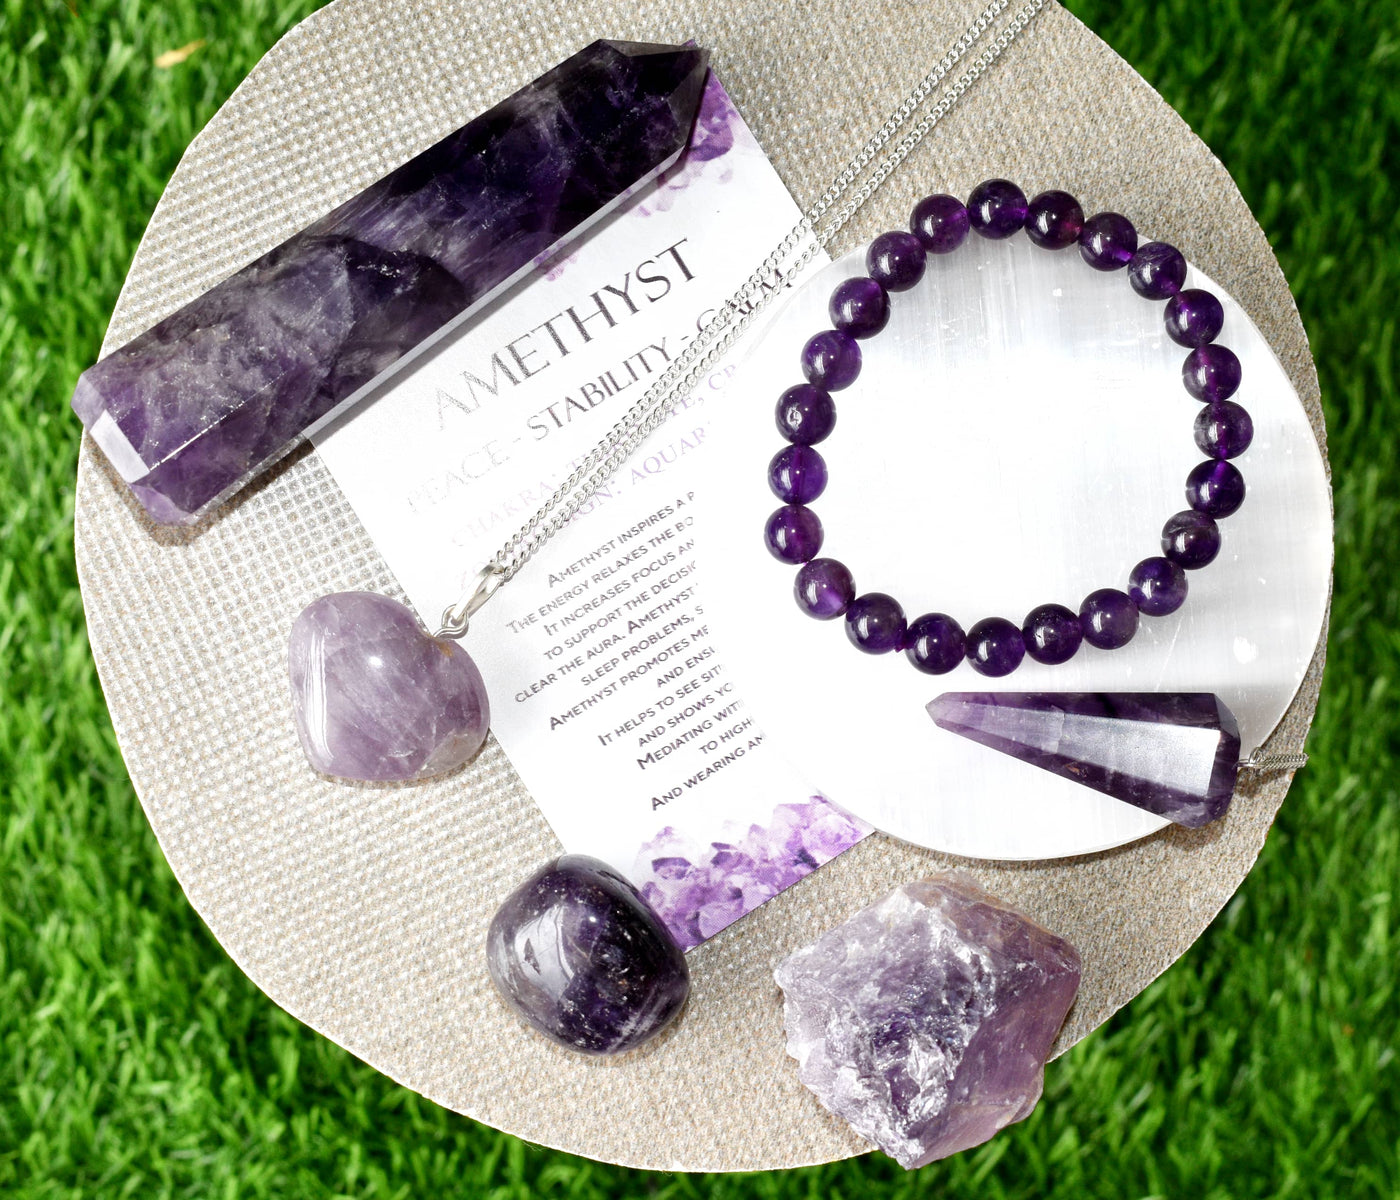 Amethyst Crystal Gift Set For Emotional Support and Protection, Real Polished Gemstones.-Protection, Real Polished Gemstones